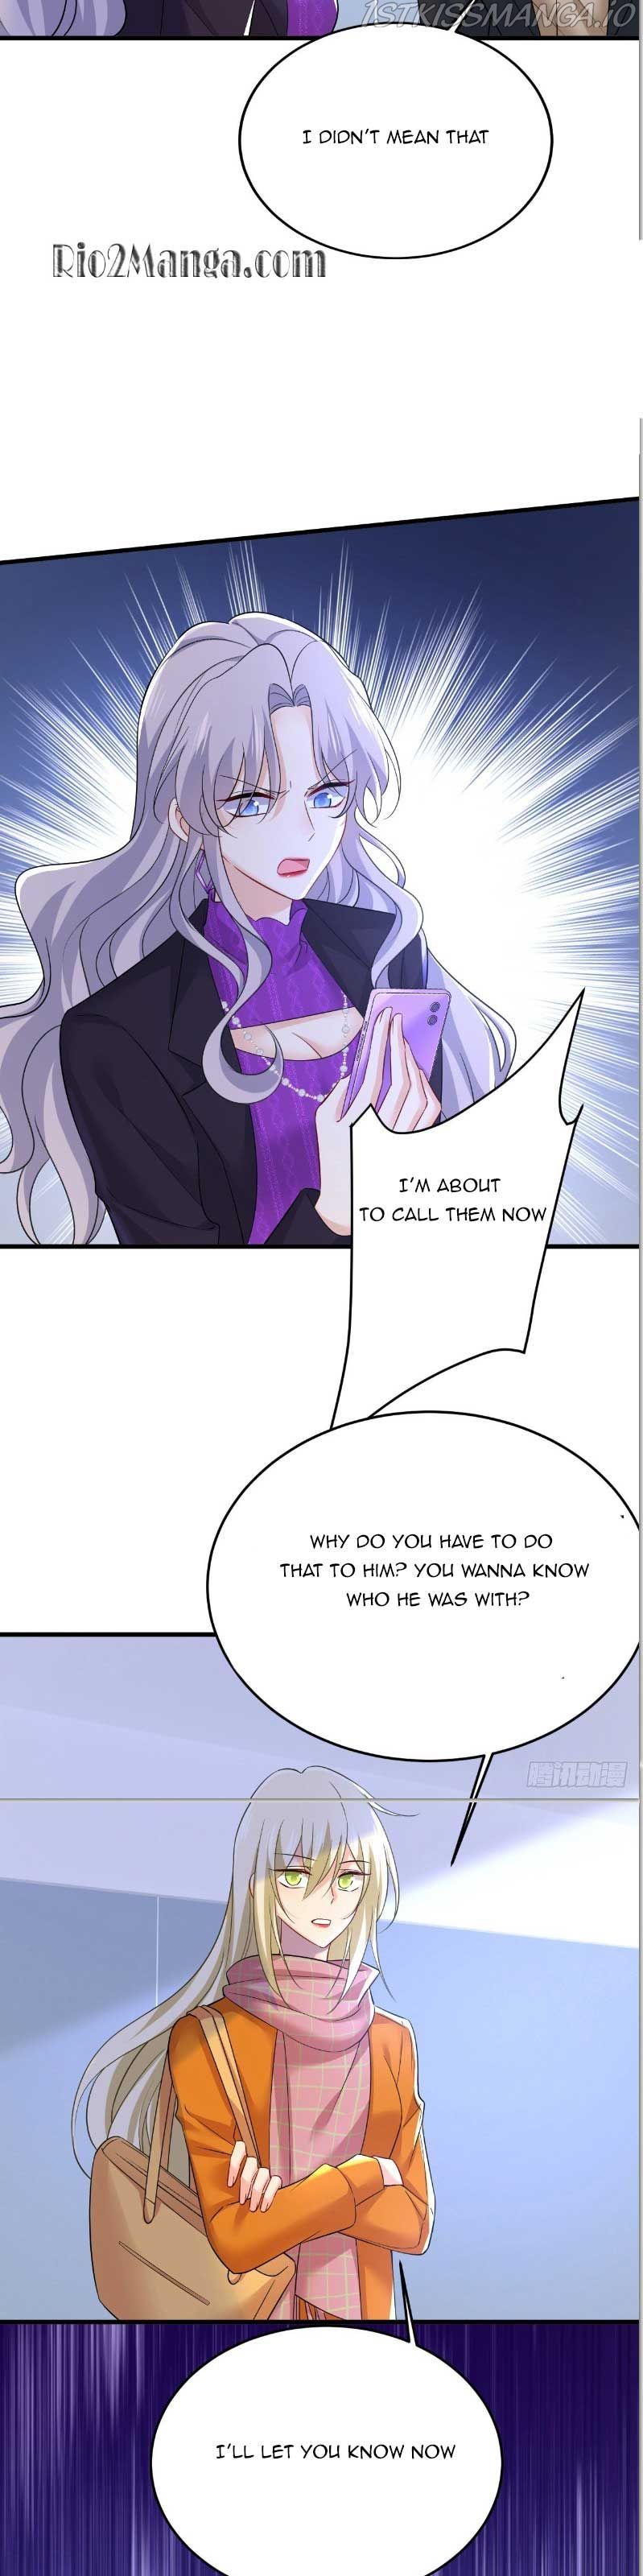 CEO Above, Me Below Chapter 561 page 56